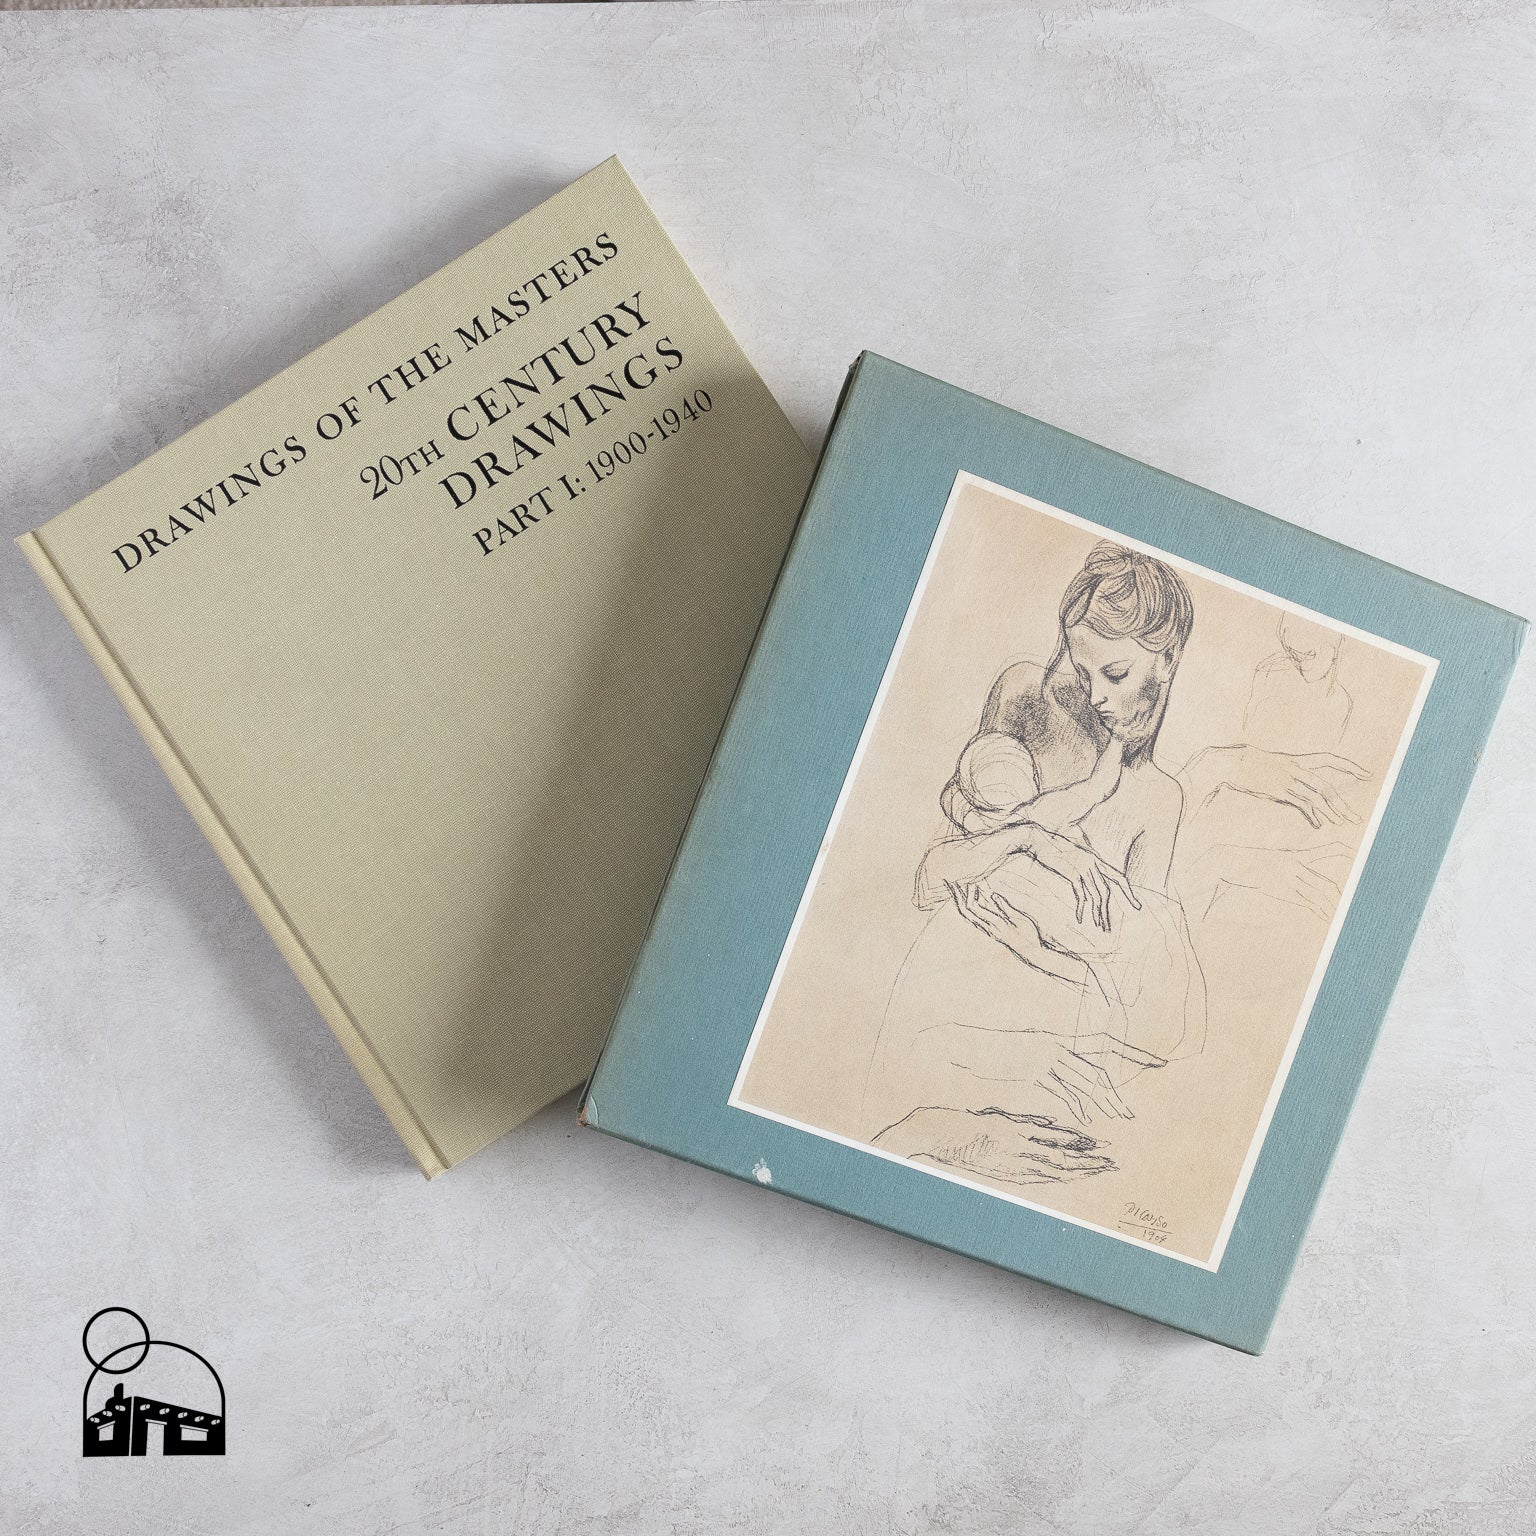 Complete 1963 Drawings of the Masters 12 - Volume Art Collection - Homekeep Market